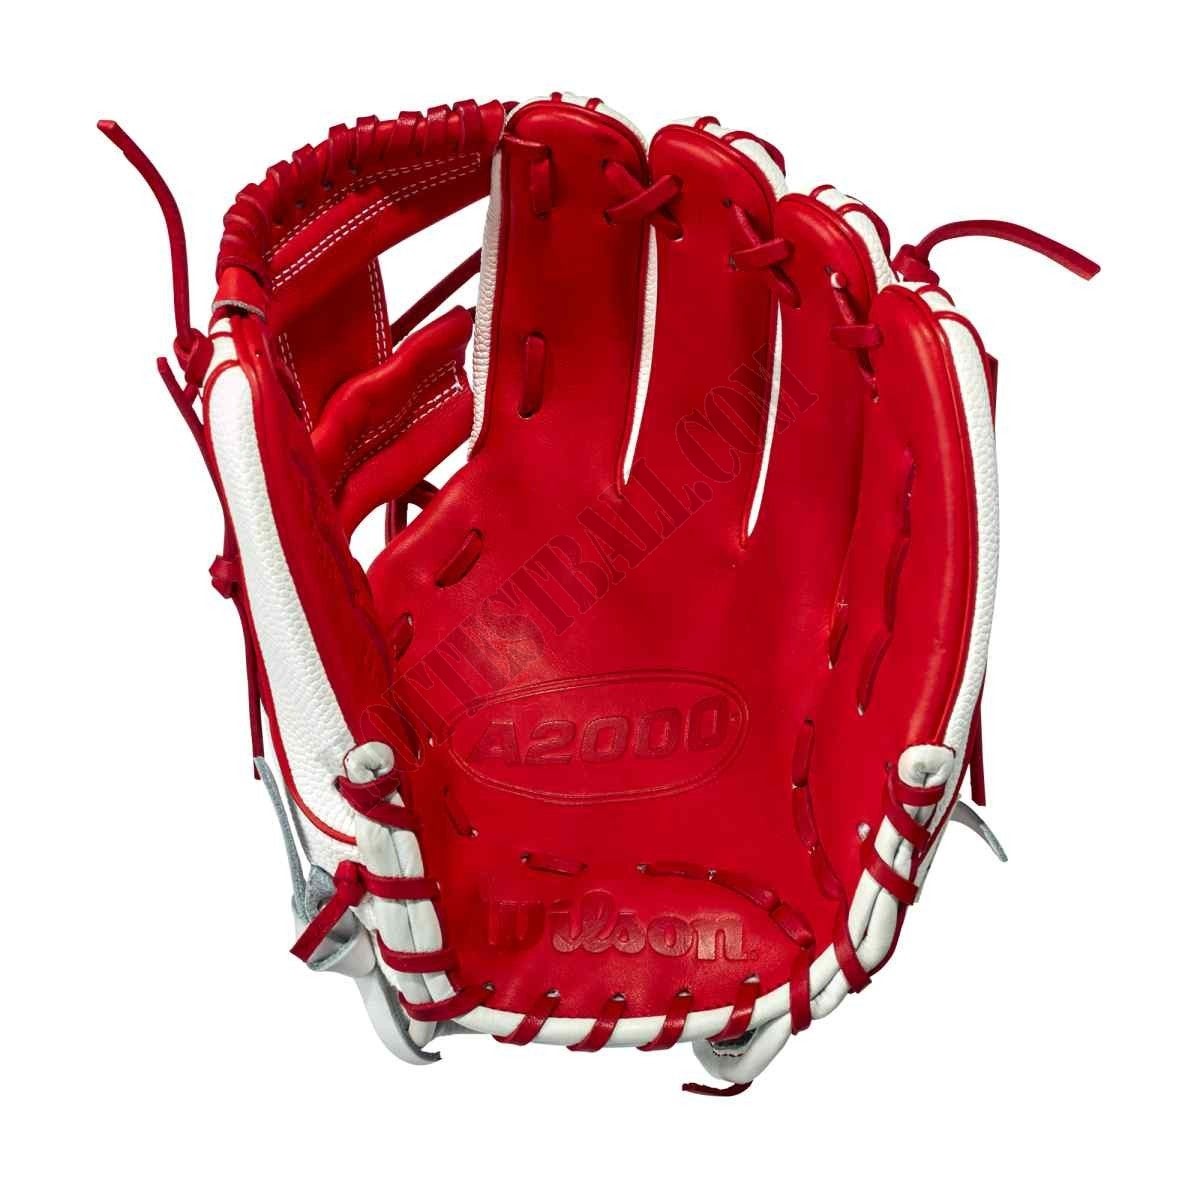 2021 A2000 1786SS Japan 11.5" Infield Baseball Glove - Limited Edition ● Wilson Promotions - -2